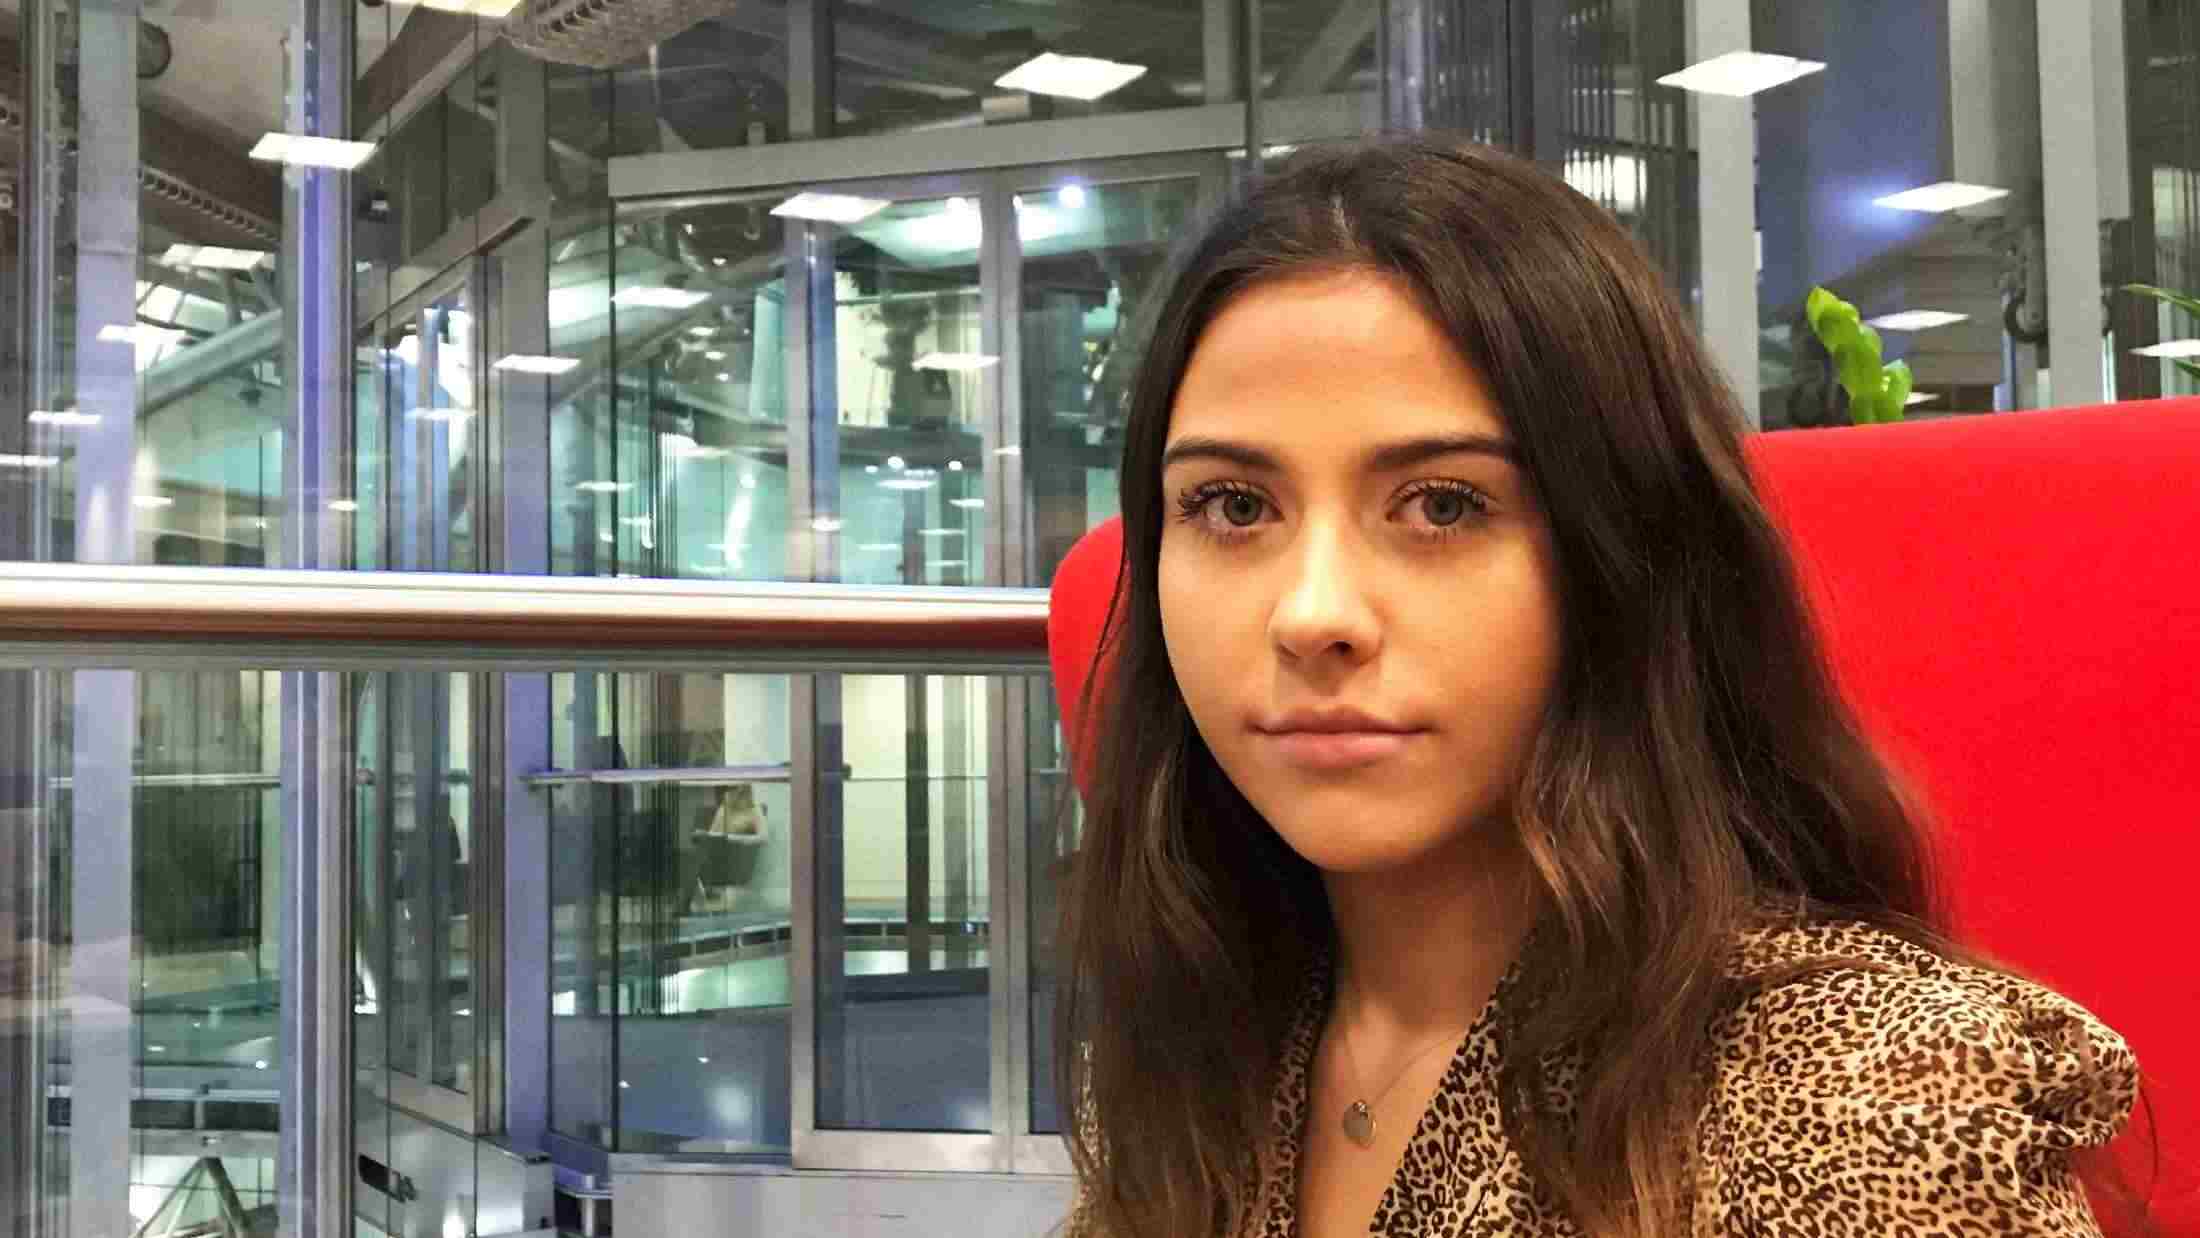 Mia Simpson, PR Apprentice, sat at in a red chair in AXA's London Office on Old Broad Street